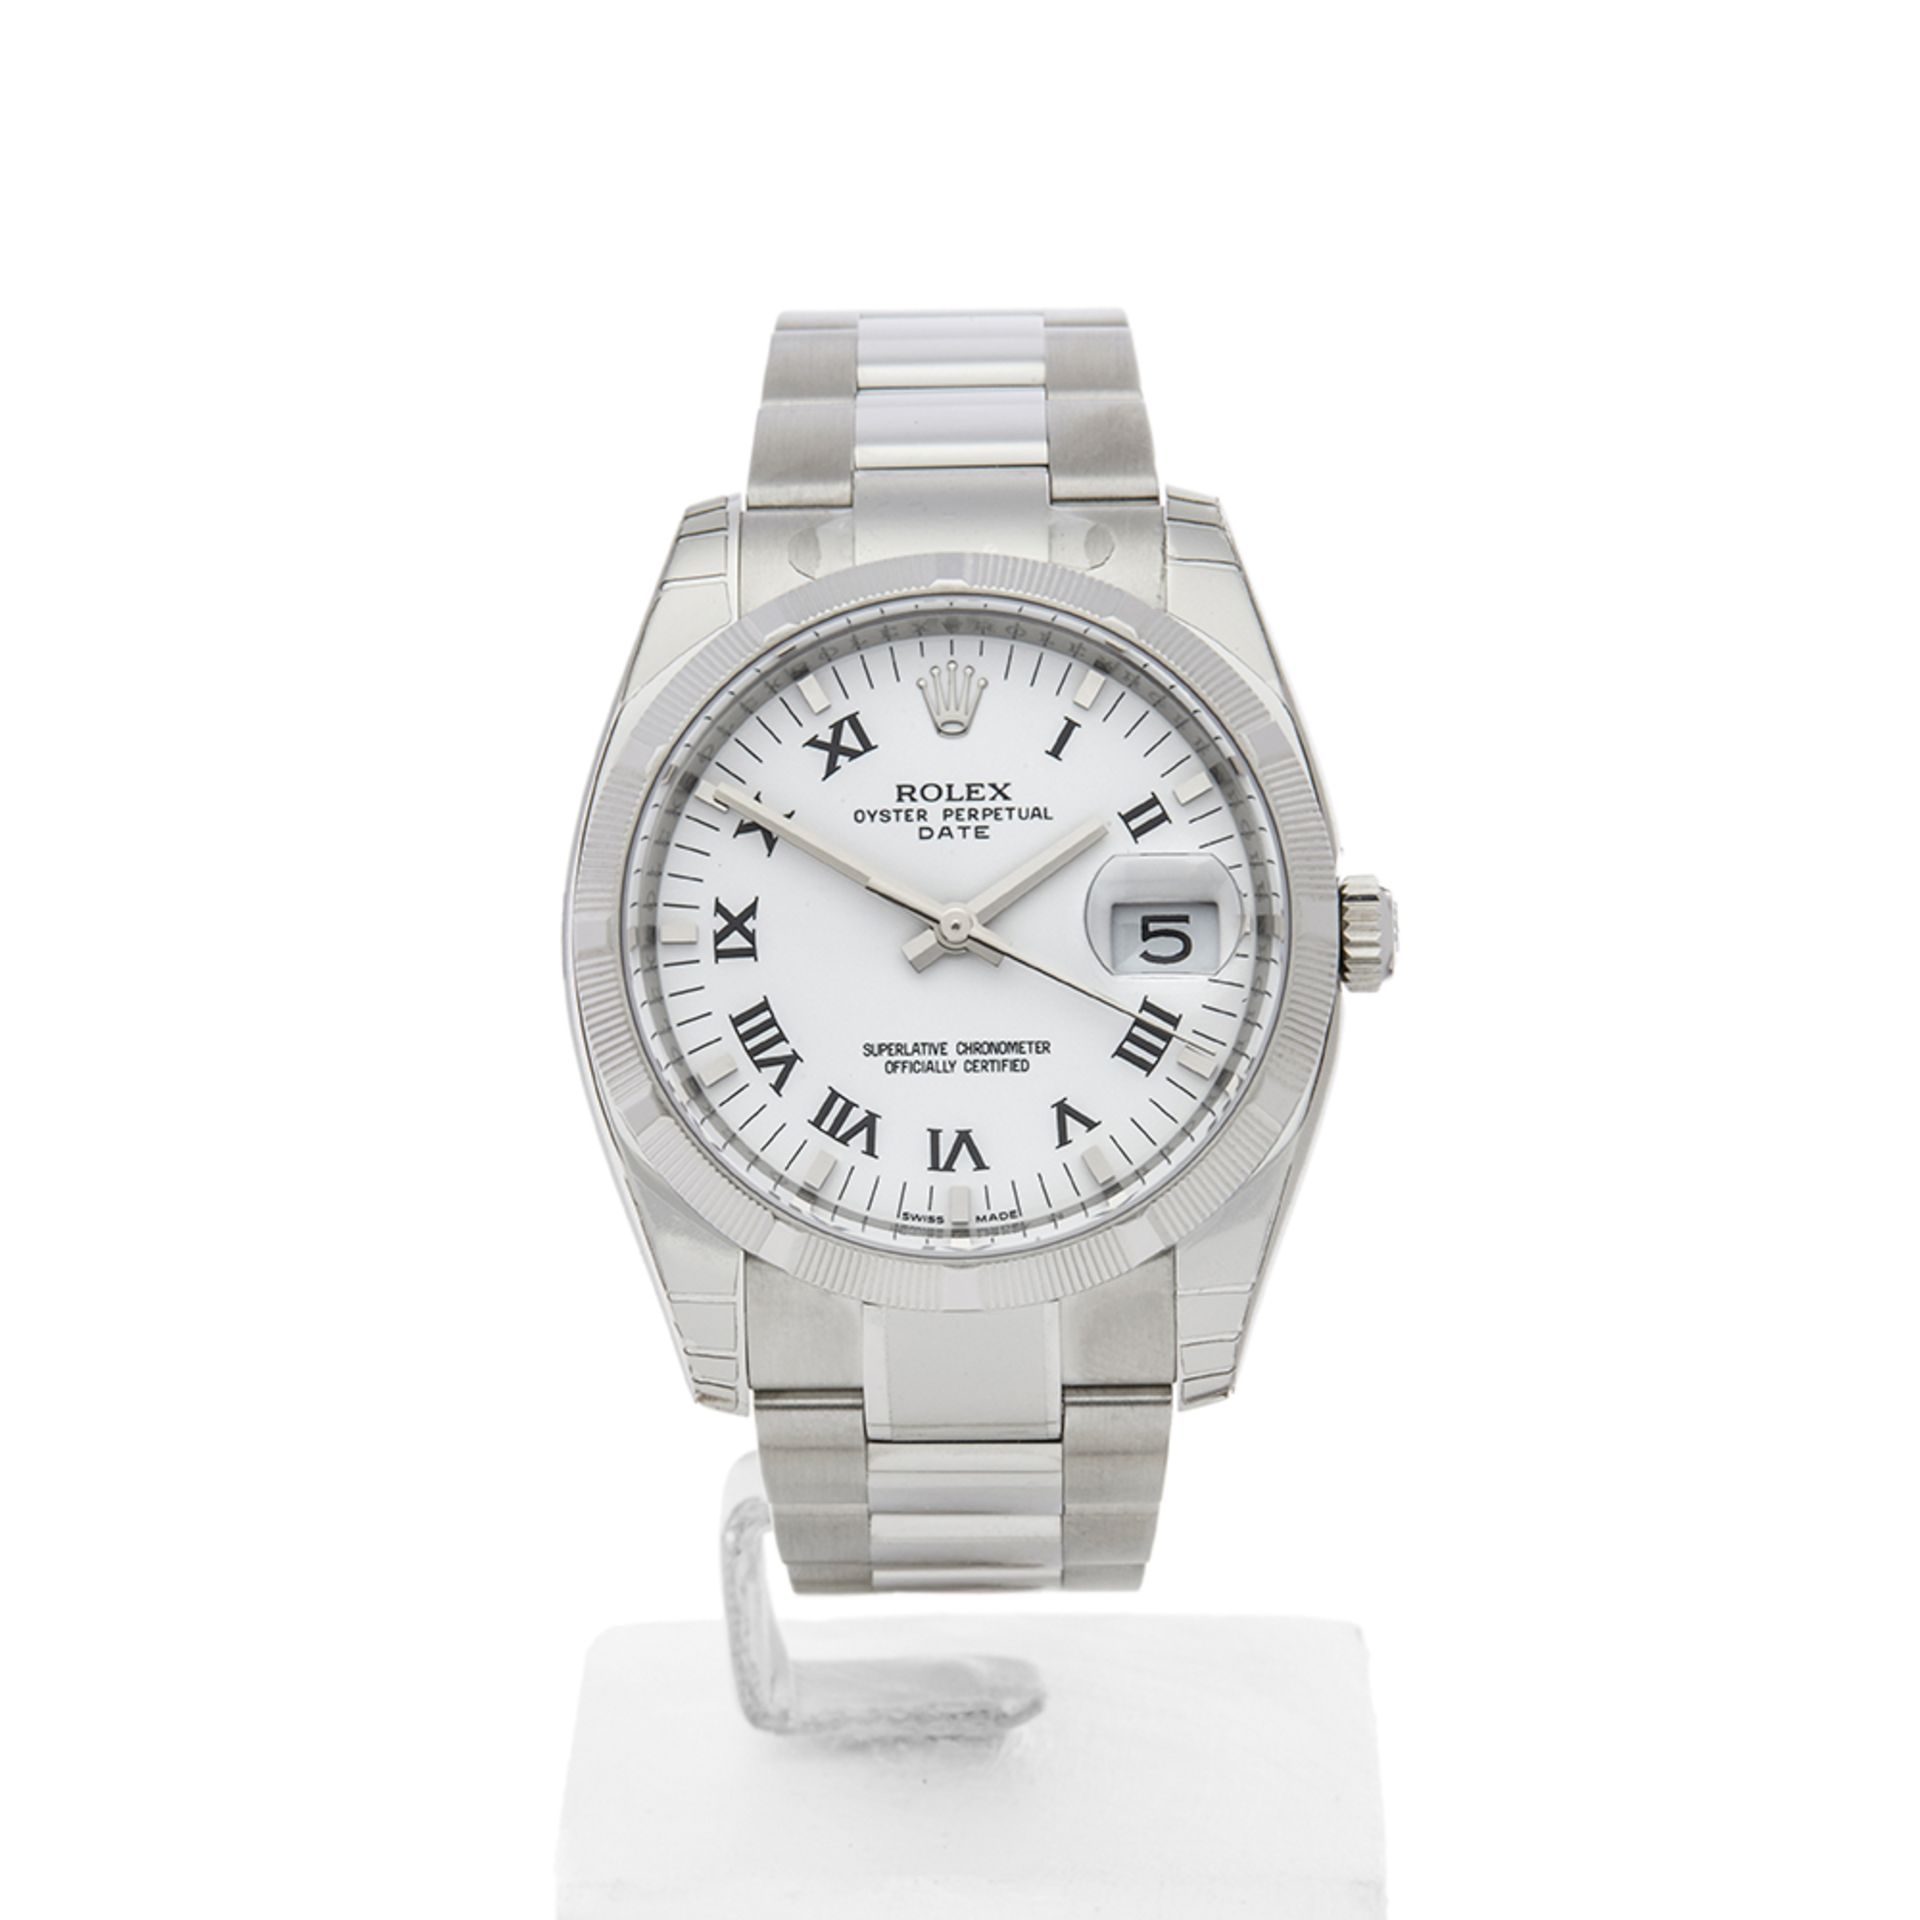 Oyster Perpetual Date 36mm Stainless Steel - 115210 - Image 2 of 8